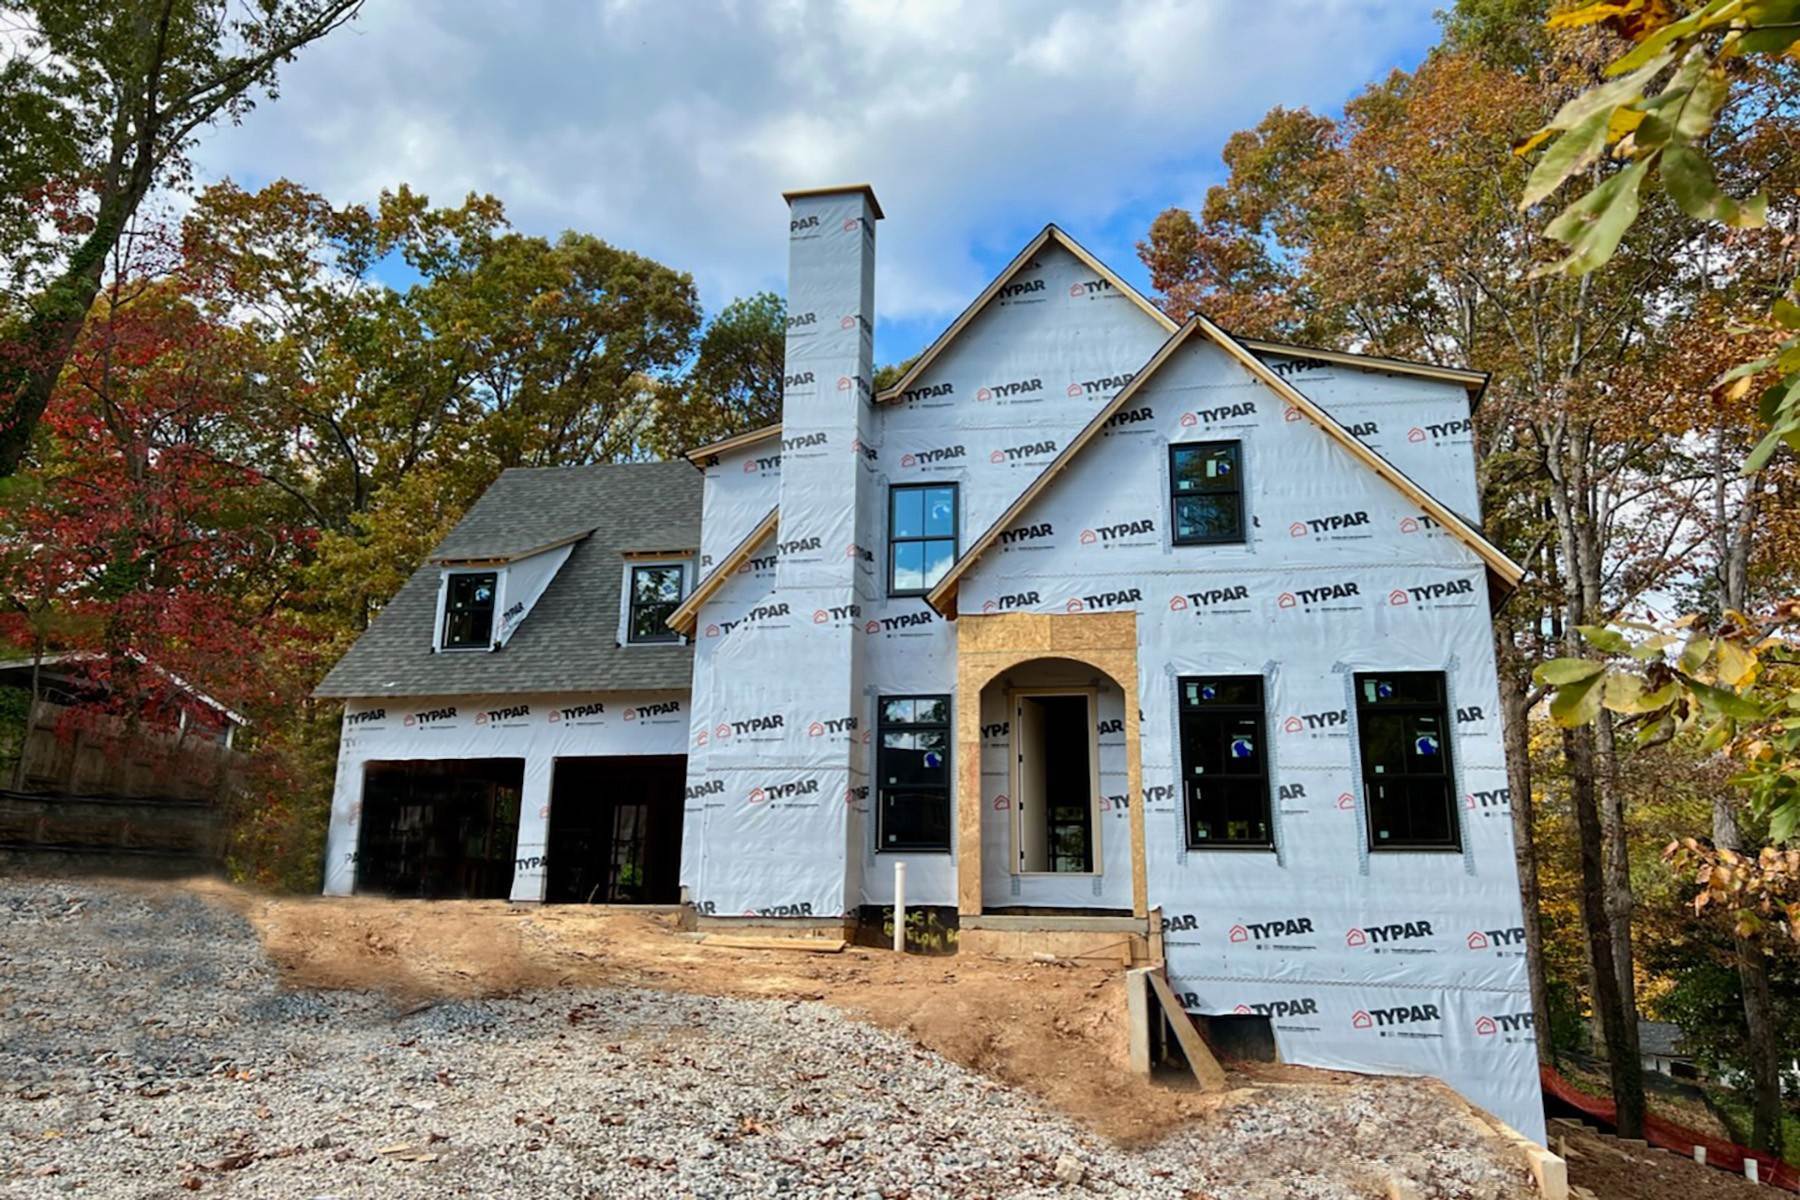 Single Family Homes for Sale at Custom Designed New Construction in Sought-after Sandy Springs Location 47 Angus Trail Sandy Springs, Georgia 30328 United States